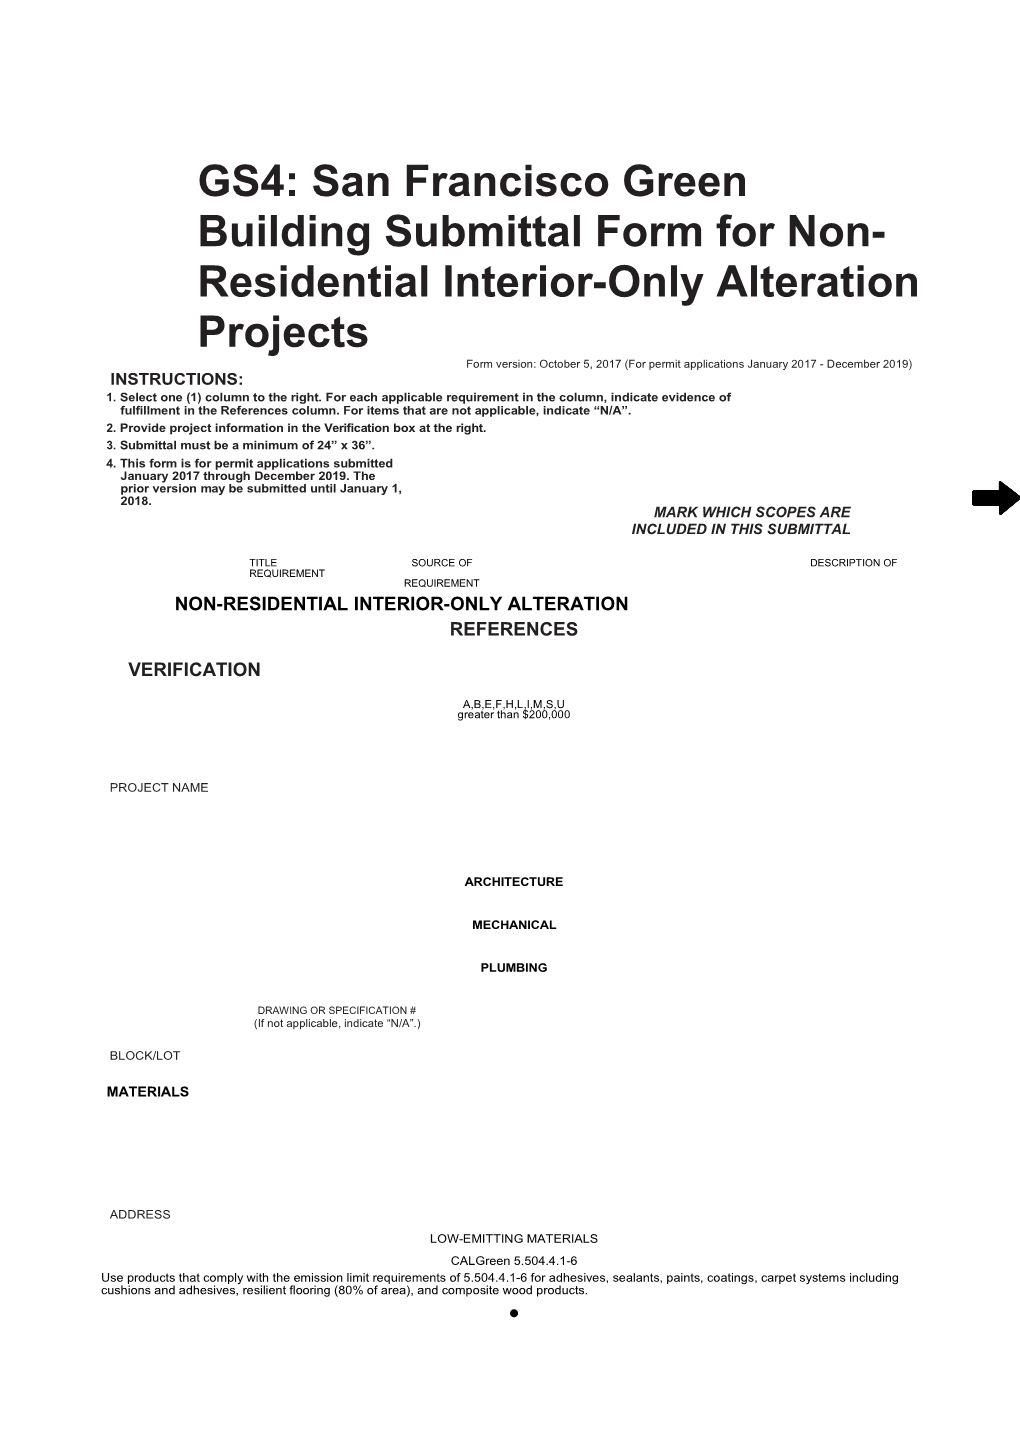 GS4: San Francisco Green Building Submittal Form for Non-Residential Interior-Only Alteration